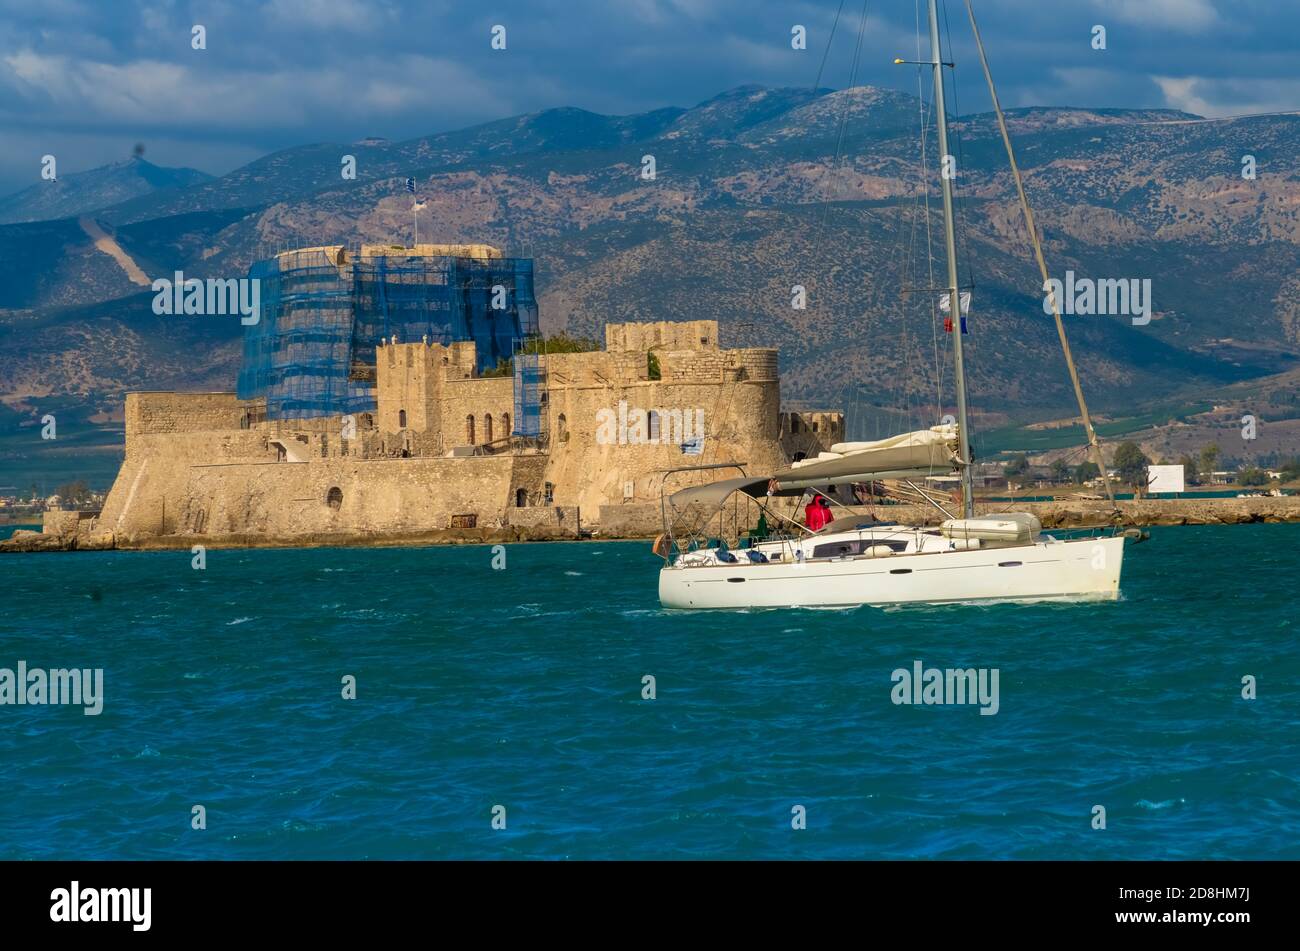 The ruins of the water castle of Bourtzi , a Venetian castle located in the  middle of the harbour of Nafplio, Peloponnese, Greece Stock Photo - Alamy